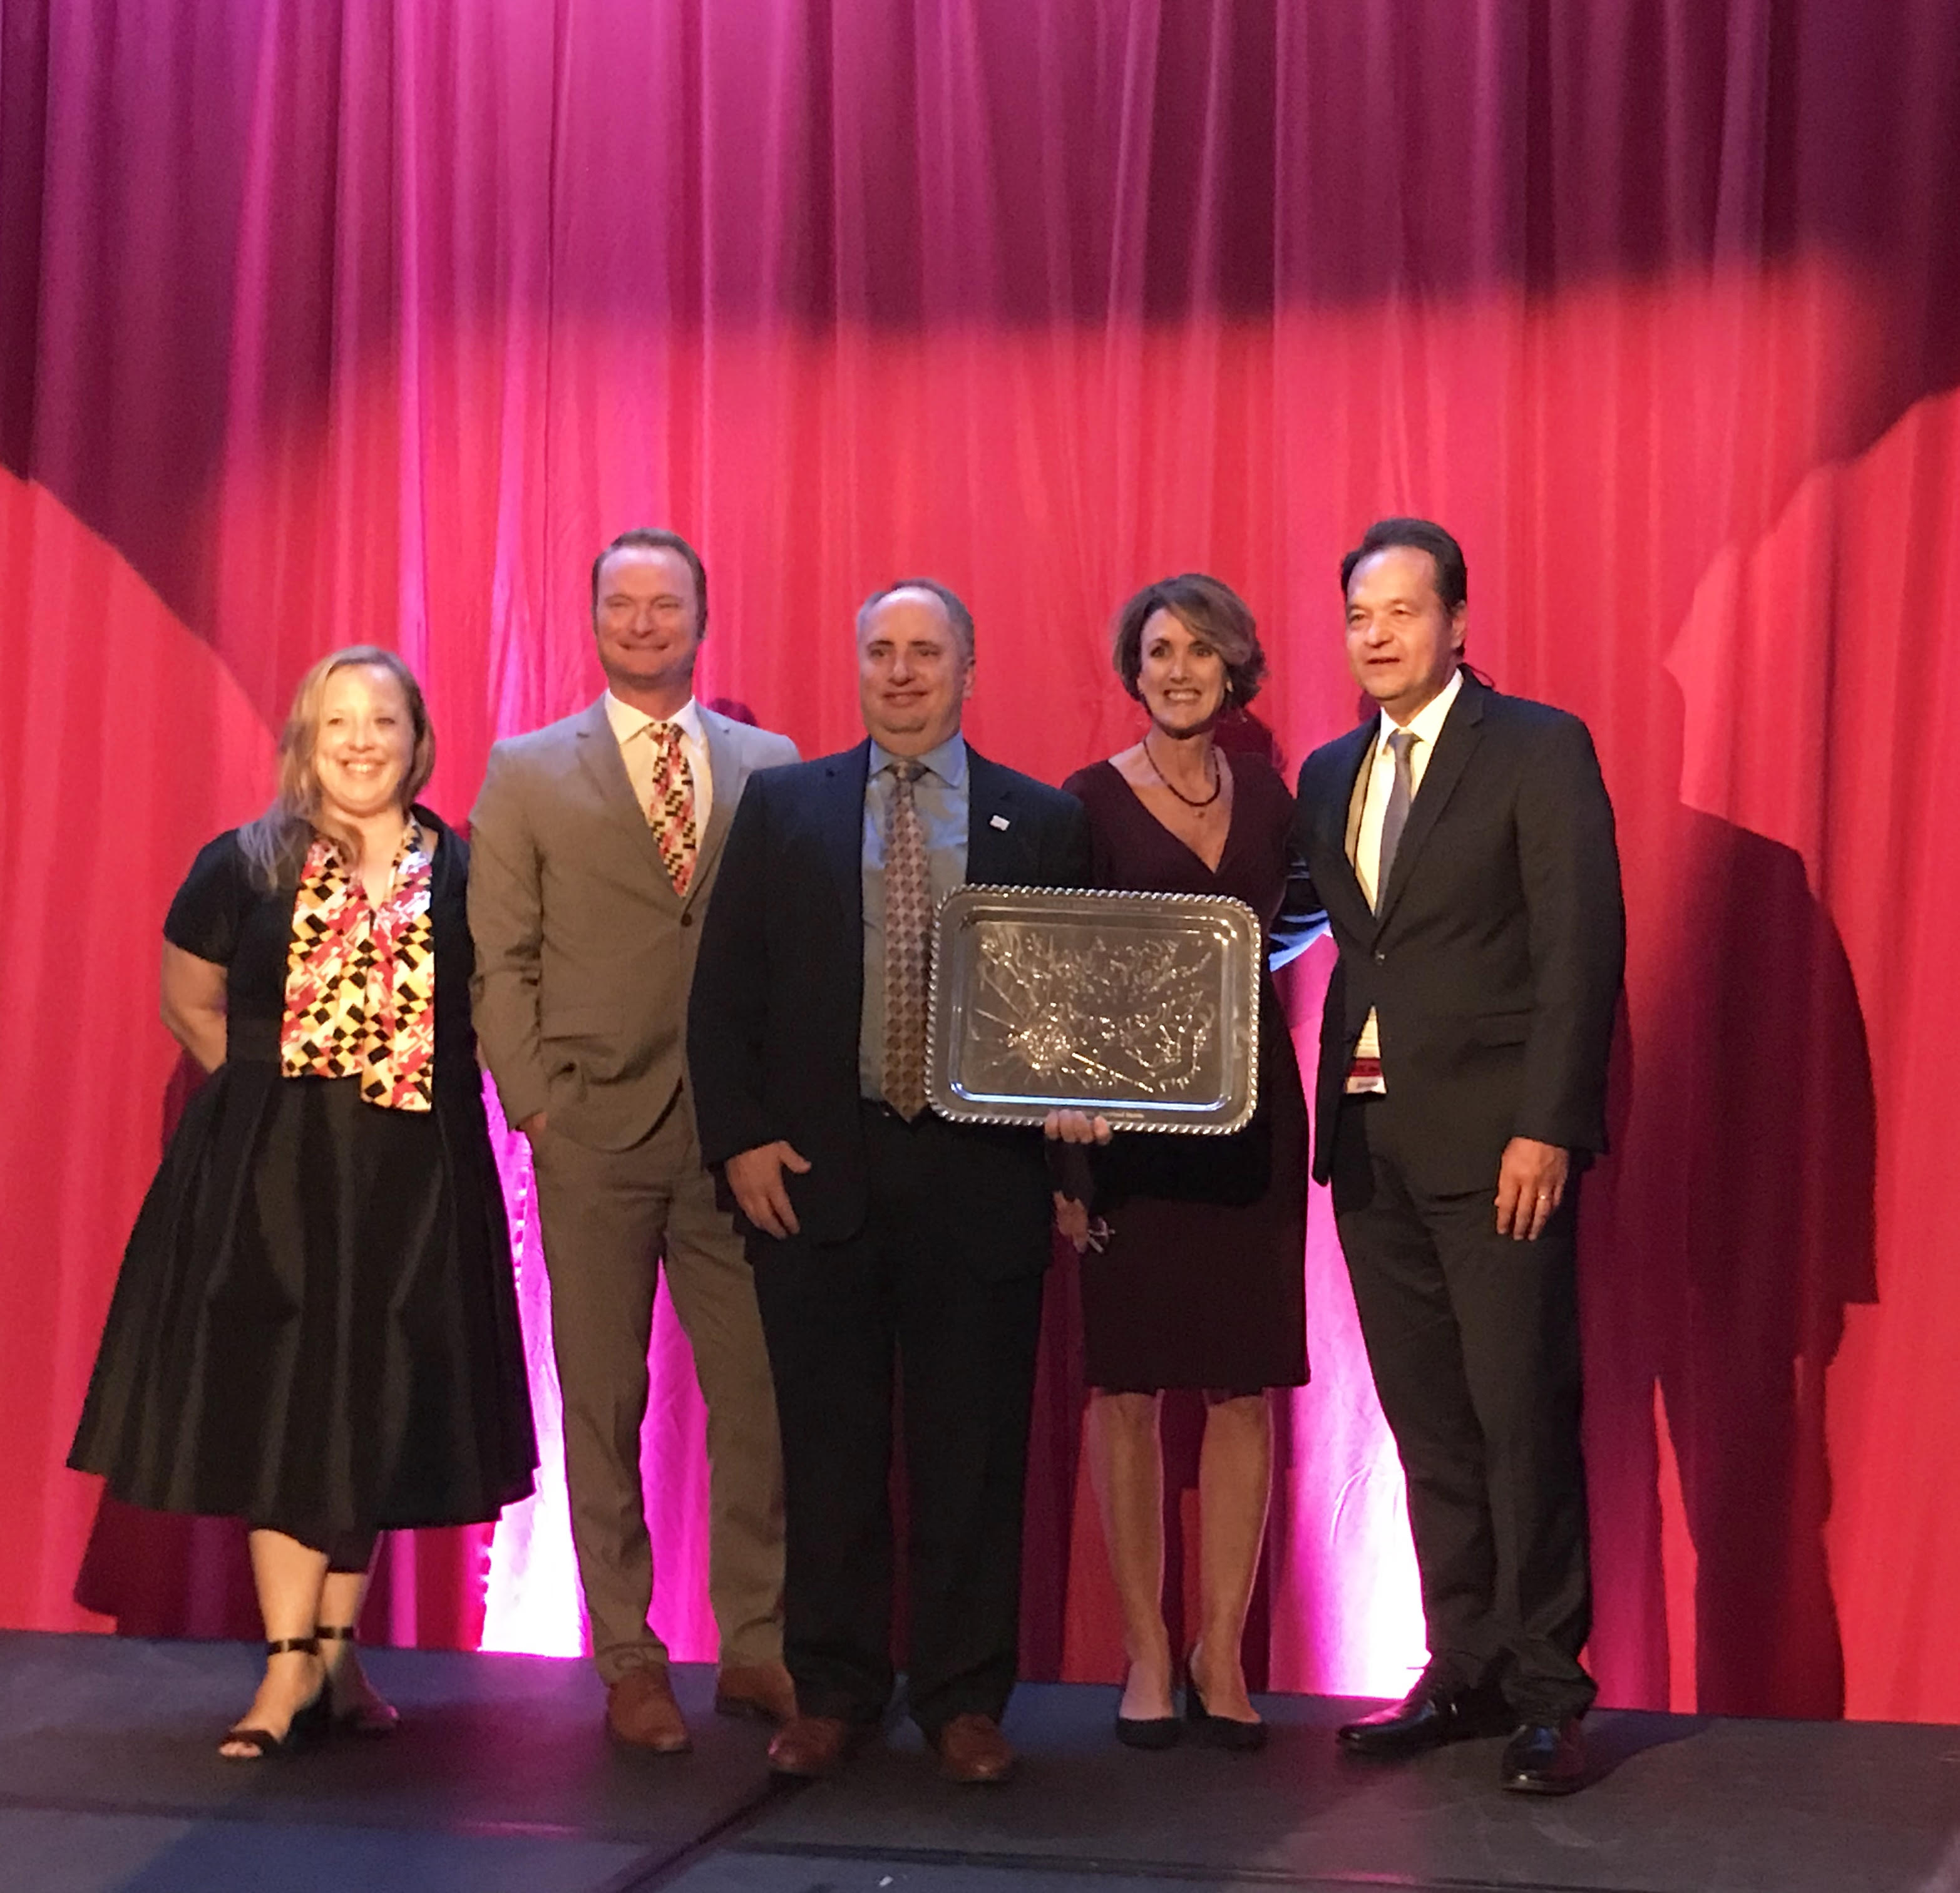 Maryland Sports Commission’s Terry Hasseltine Receives the Maryland Association of Destination Marketing Organizations Partner of the Year Award 